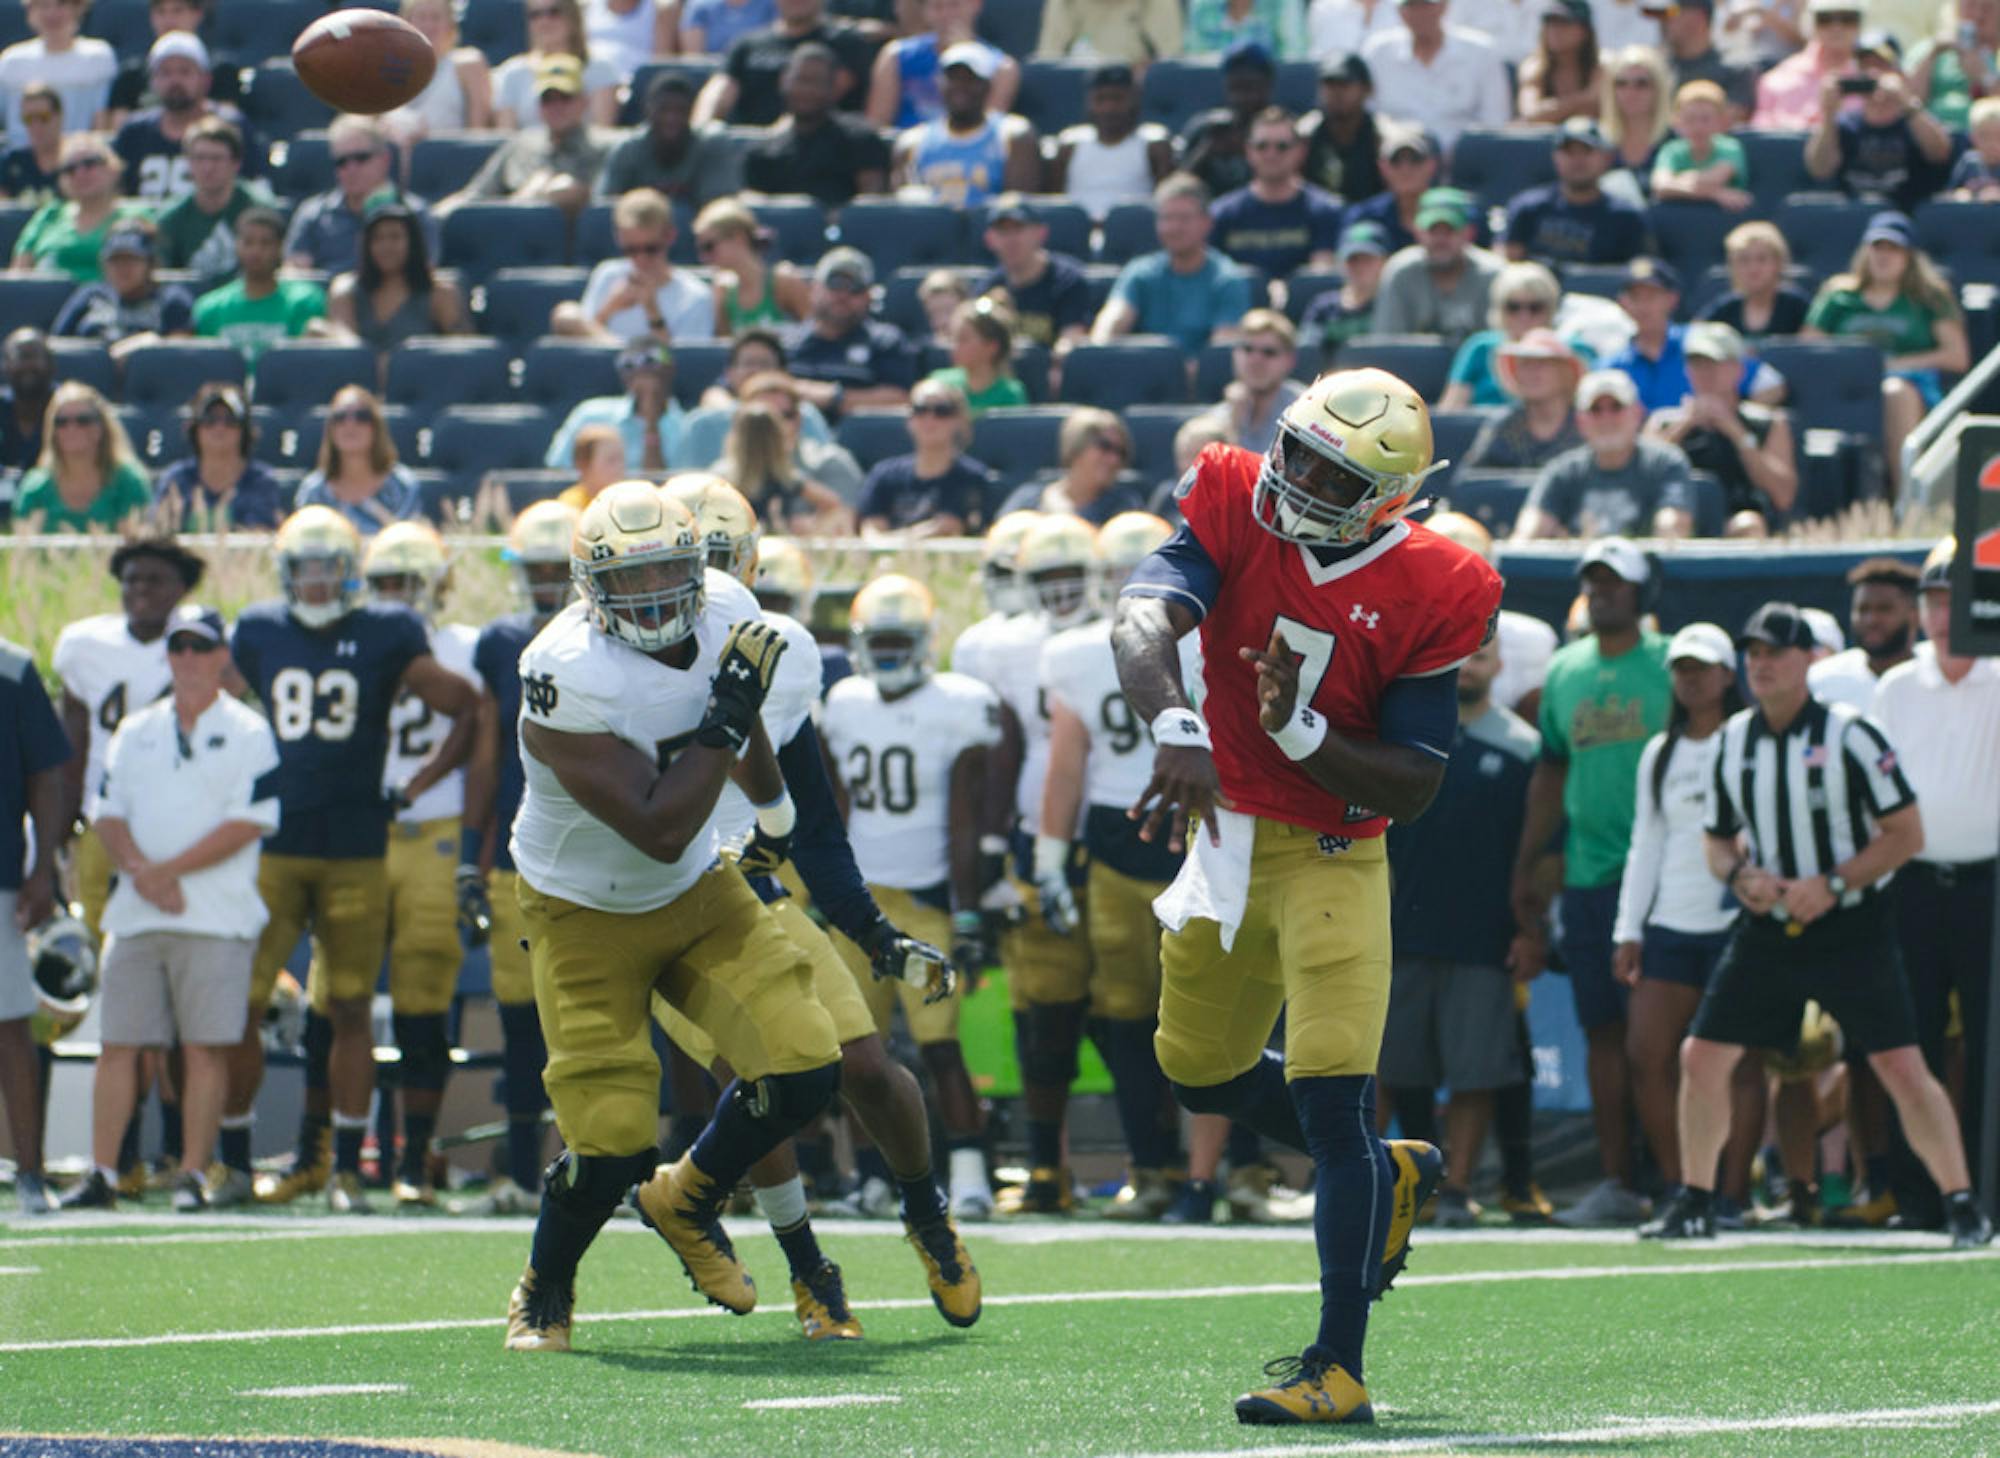 Junior quarterback Brandon Wimbush follows through after firing a pass across the field during Notre Dame’s New and Gold scrimmage Aug. 20 at Notre Dame Stadium. Wimbush played in two games as a freshman in 2015 while serving as DeShone Kizer’s backup.